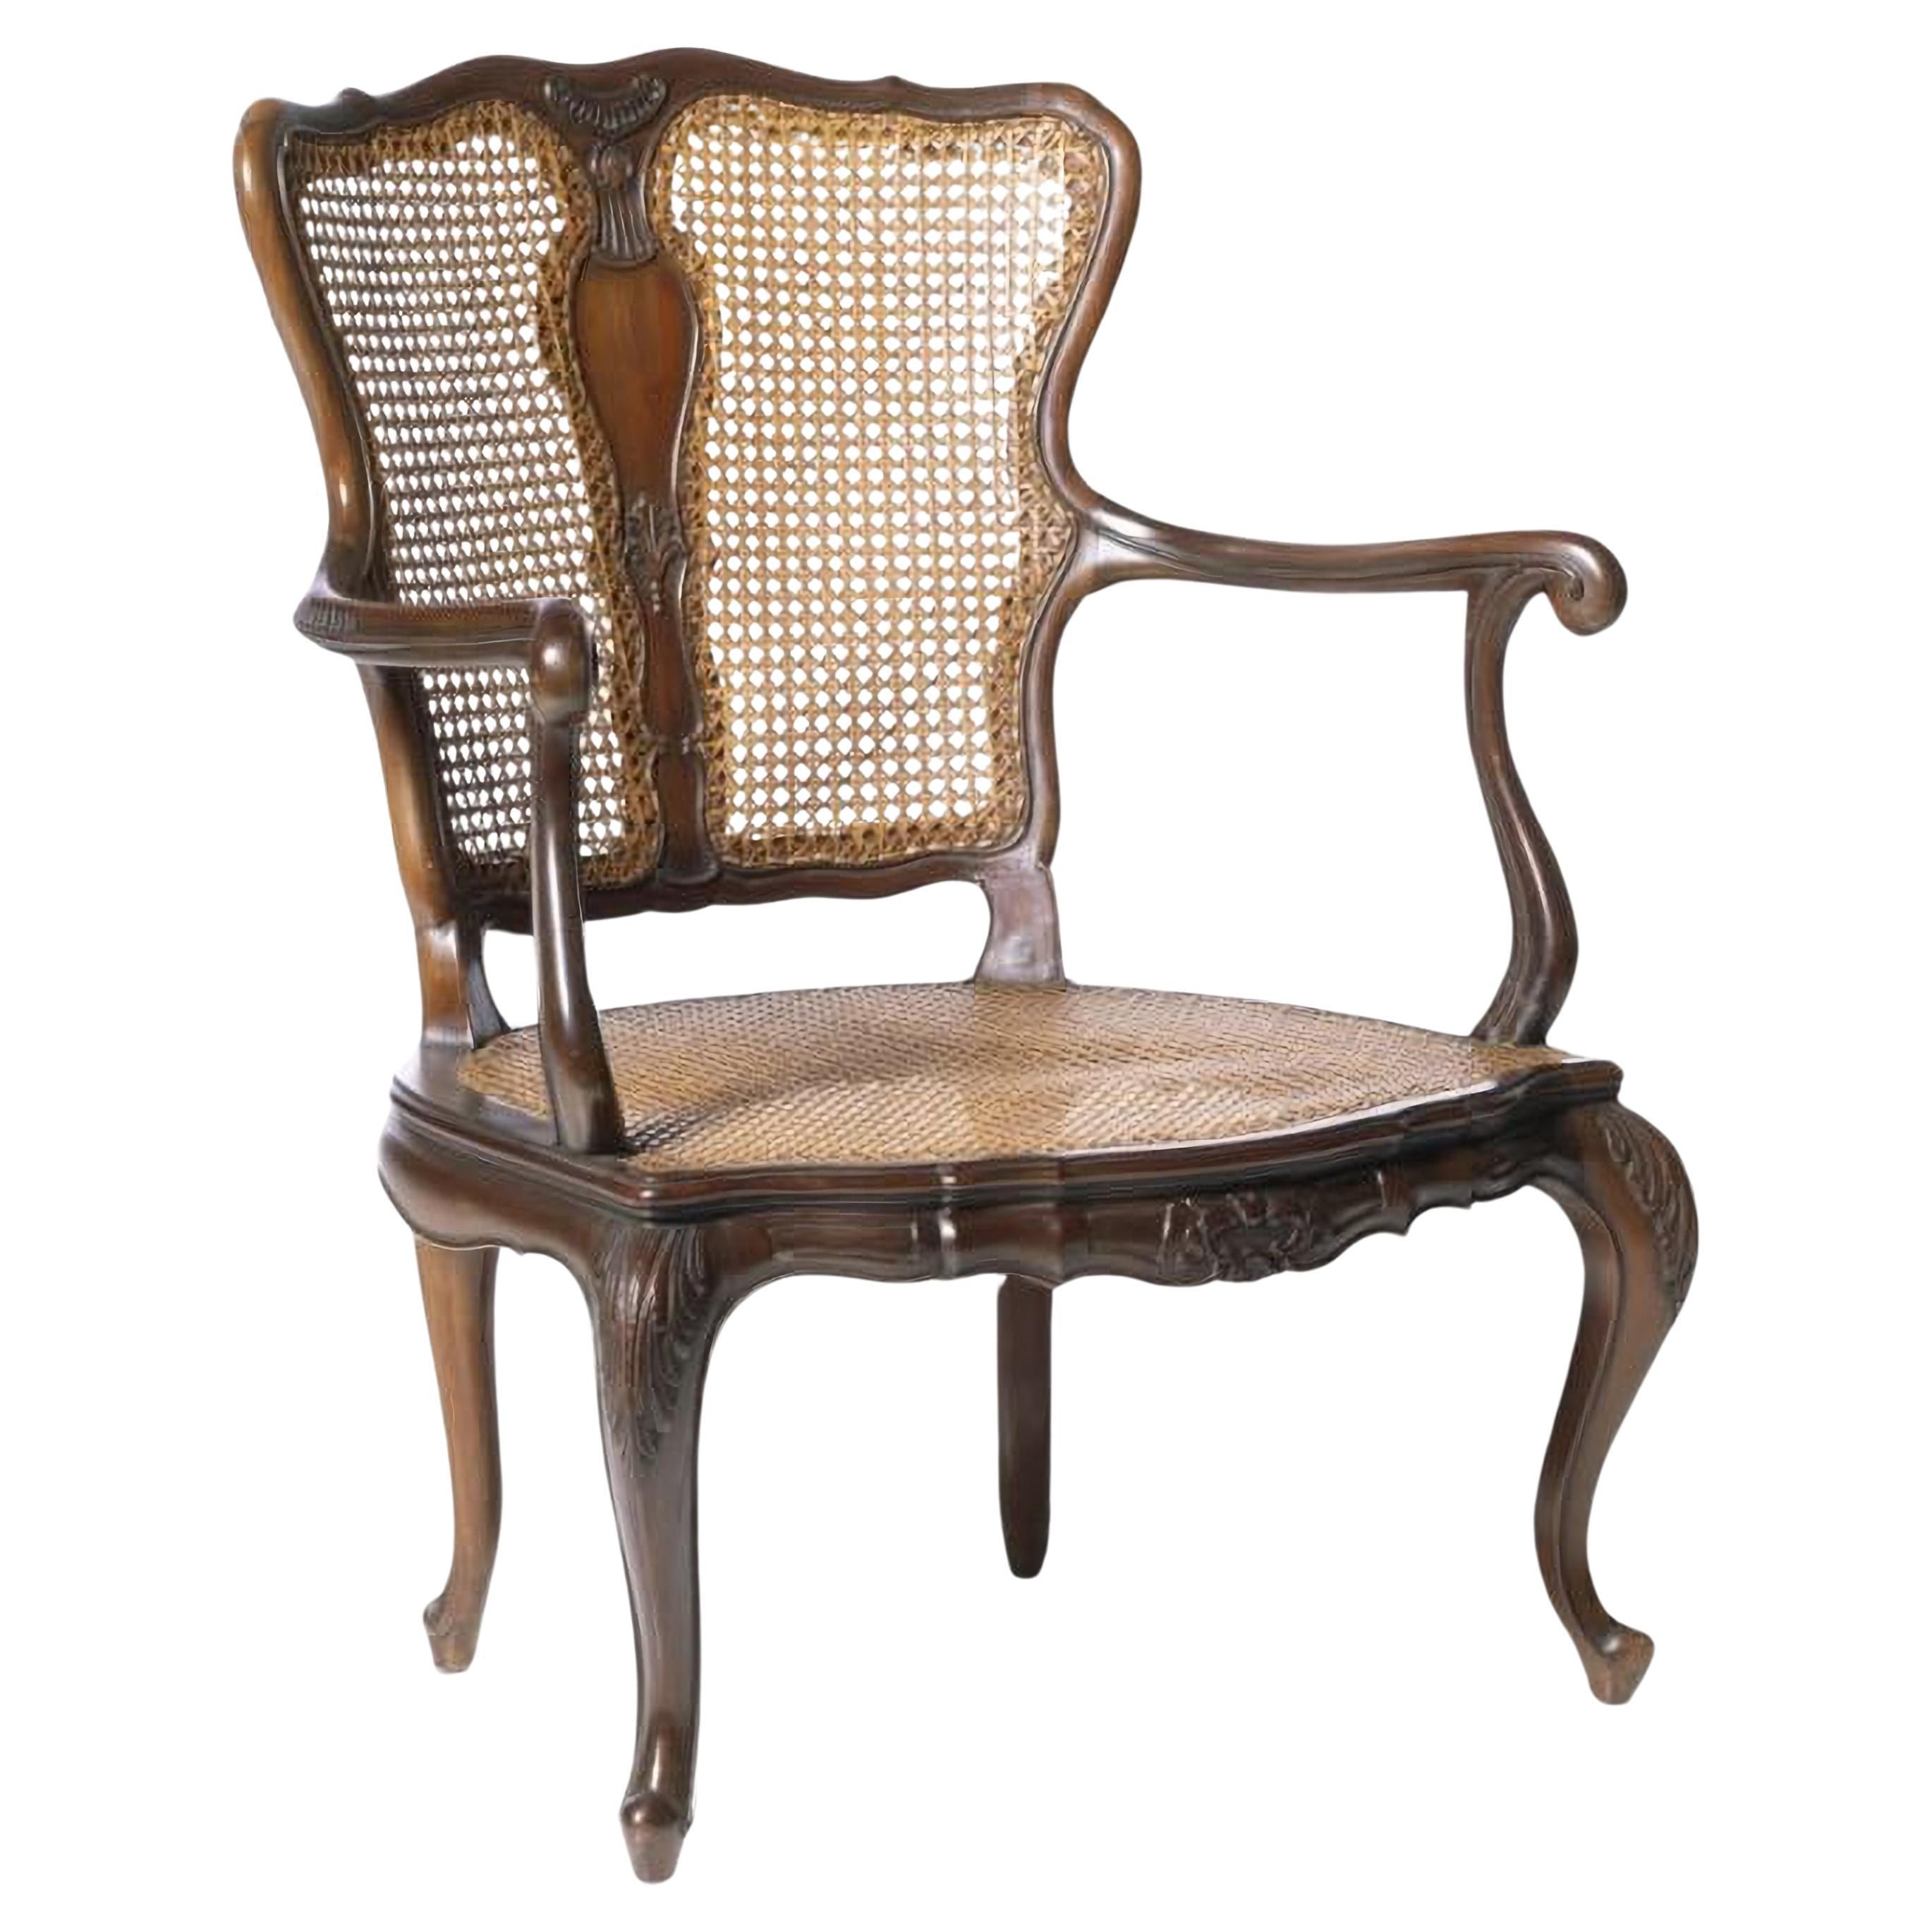 BEAUTIFUL PORTUGUESE ARMCHAIR from the 19th century